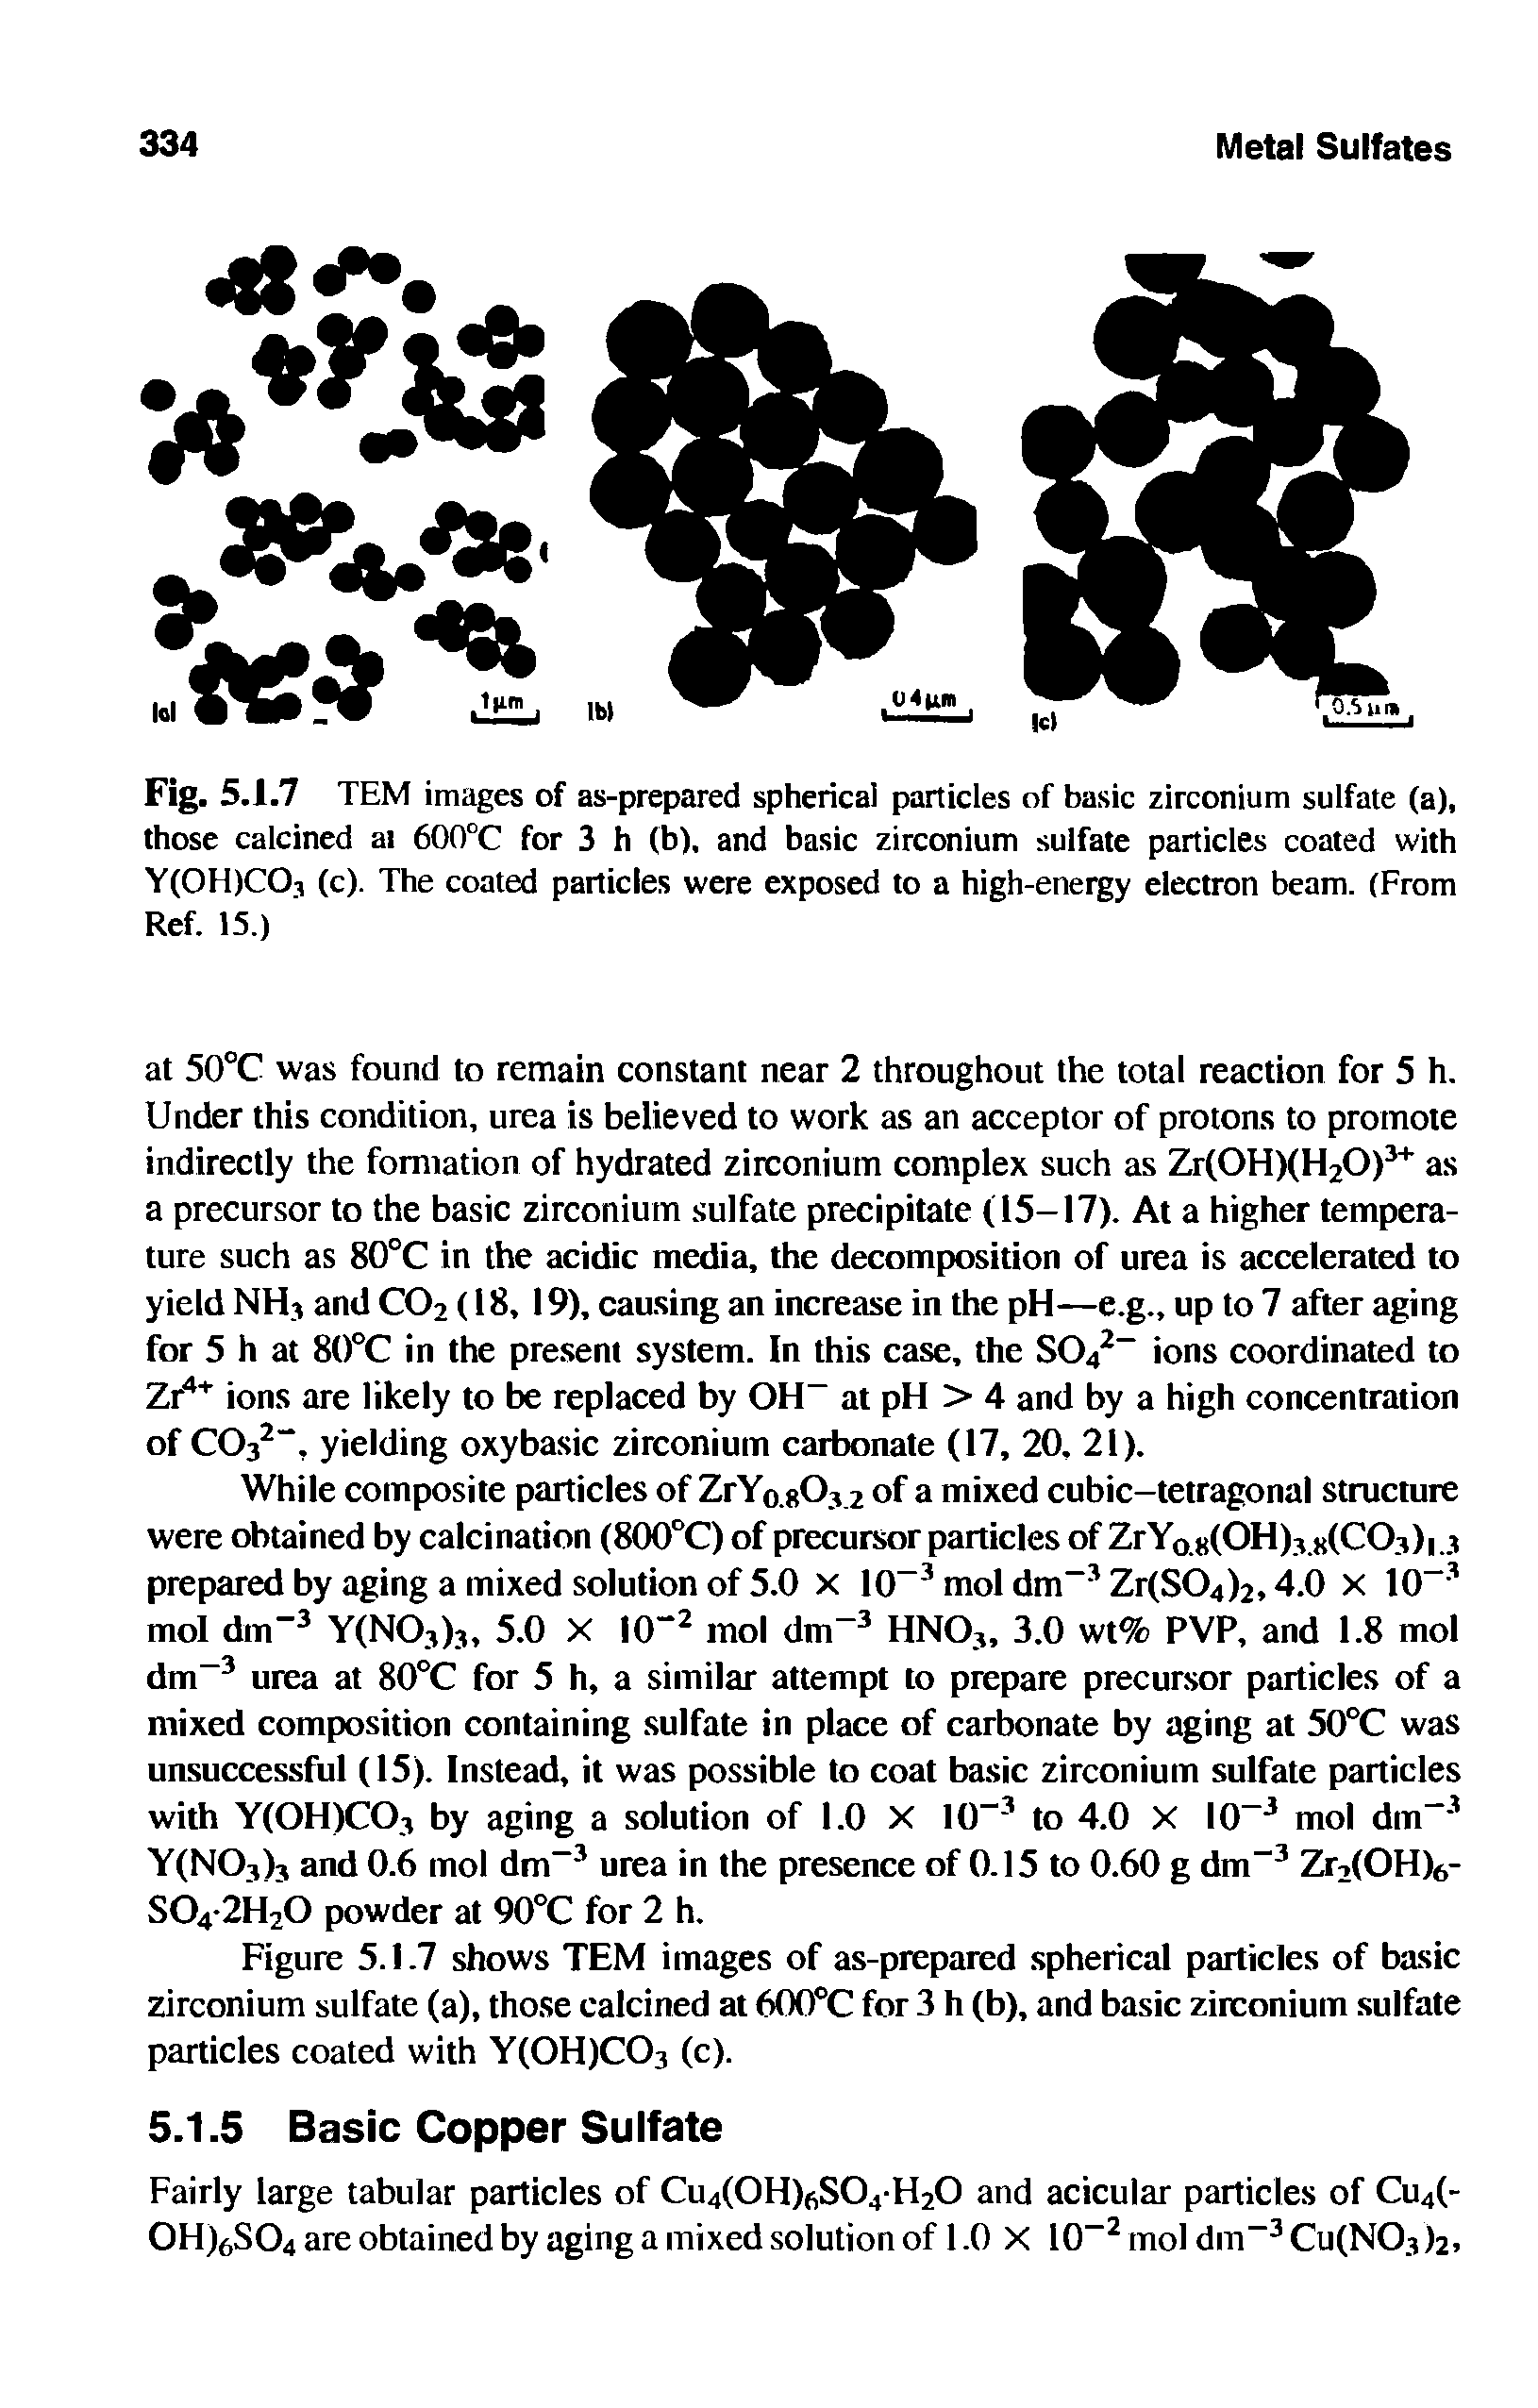 Fig. 5.1.7 TEM images of as-prepared spherical particles of basic zirconium sulfate (a), those calcined at 600°C for 3 h (b), and basic zirconium sulfate particles coated with Y(0H)C03 (c). The coated particles were exposed to a high-energy electron beam. (From Ref. 15.)...